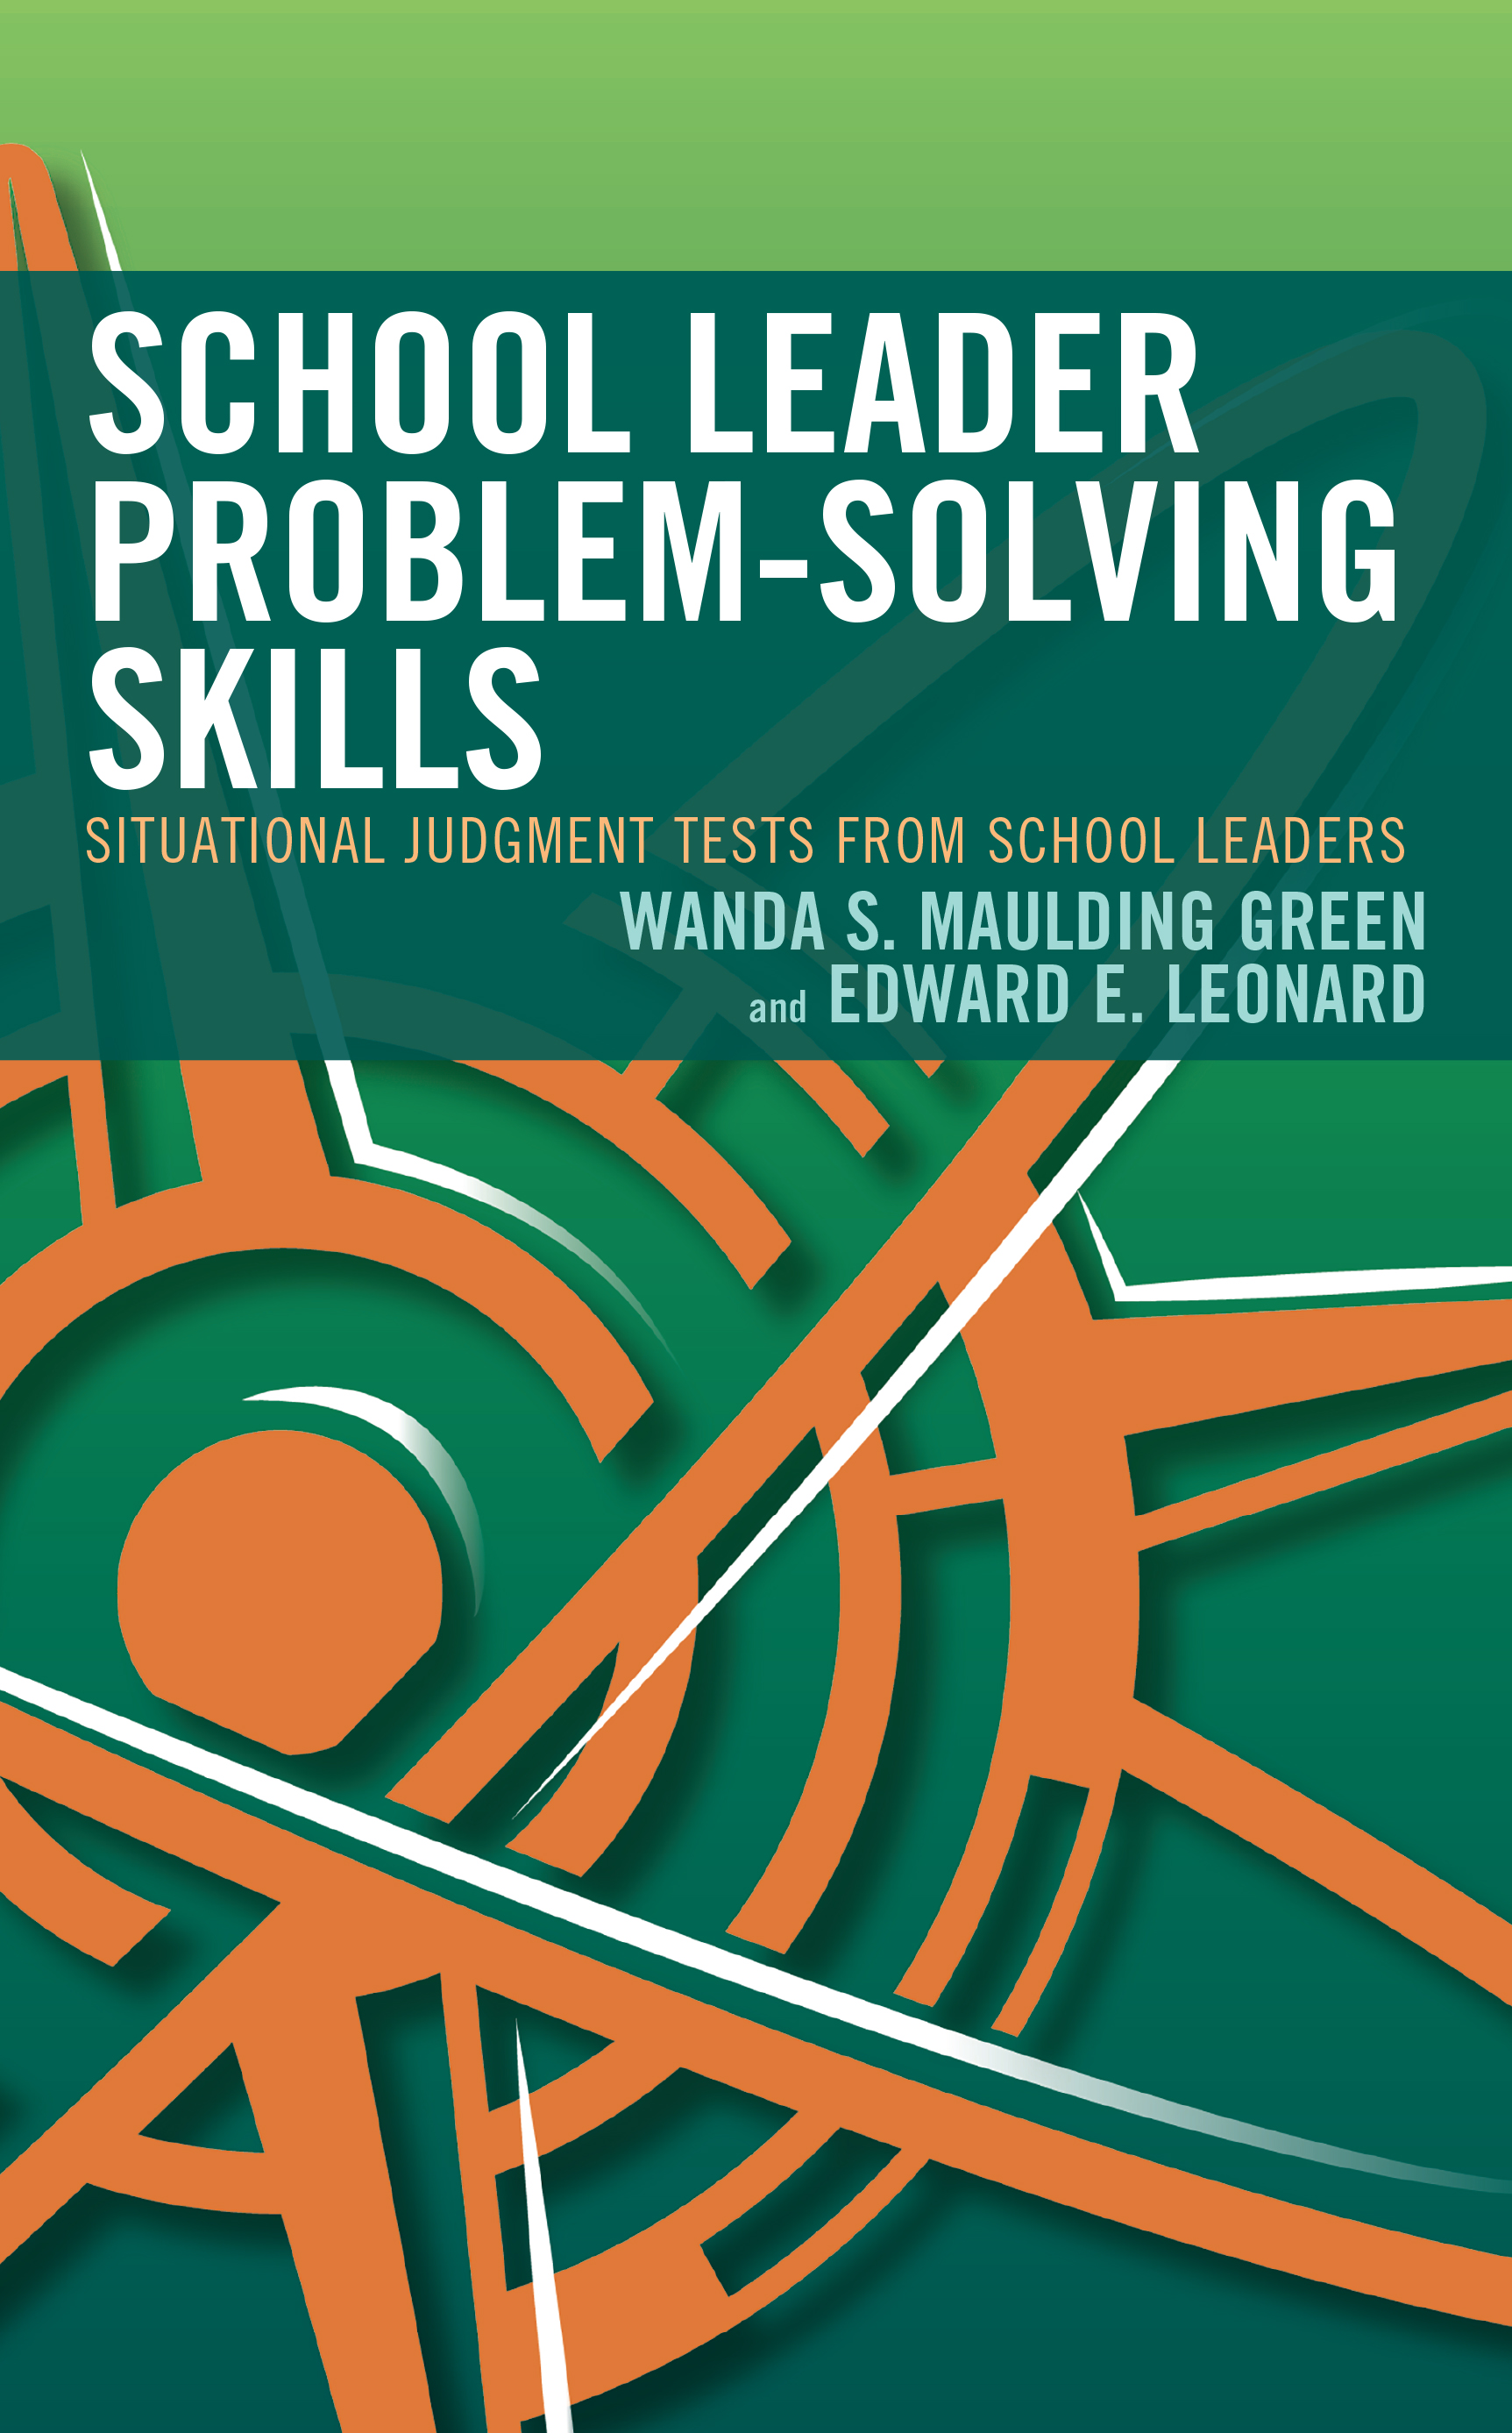 School Leader Problem-Solving Skills: Situational Judgment Tests from School Leaders